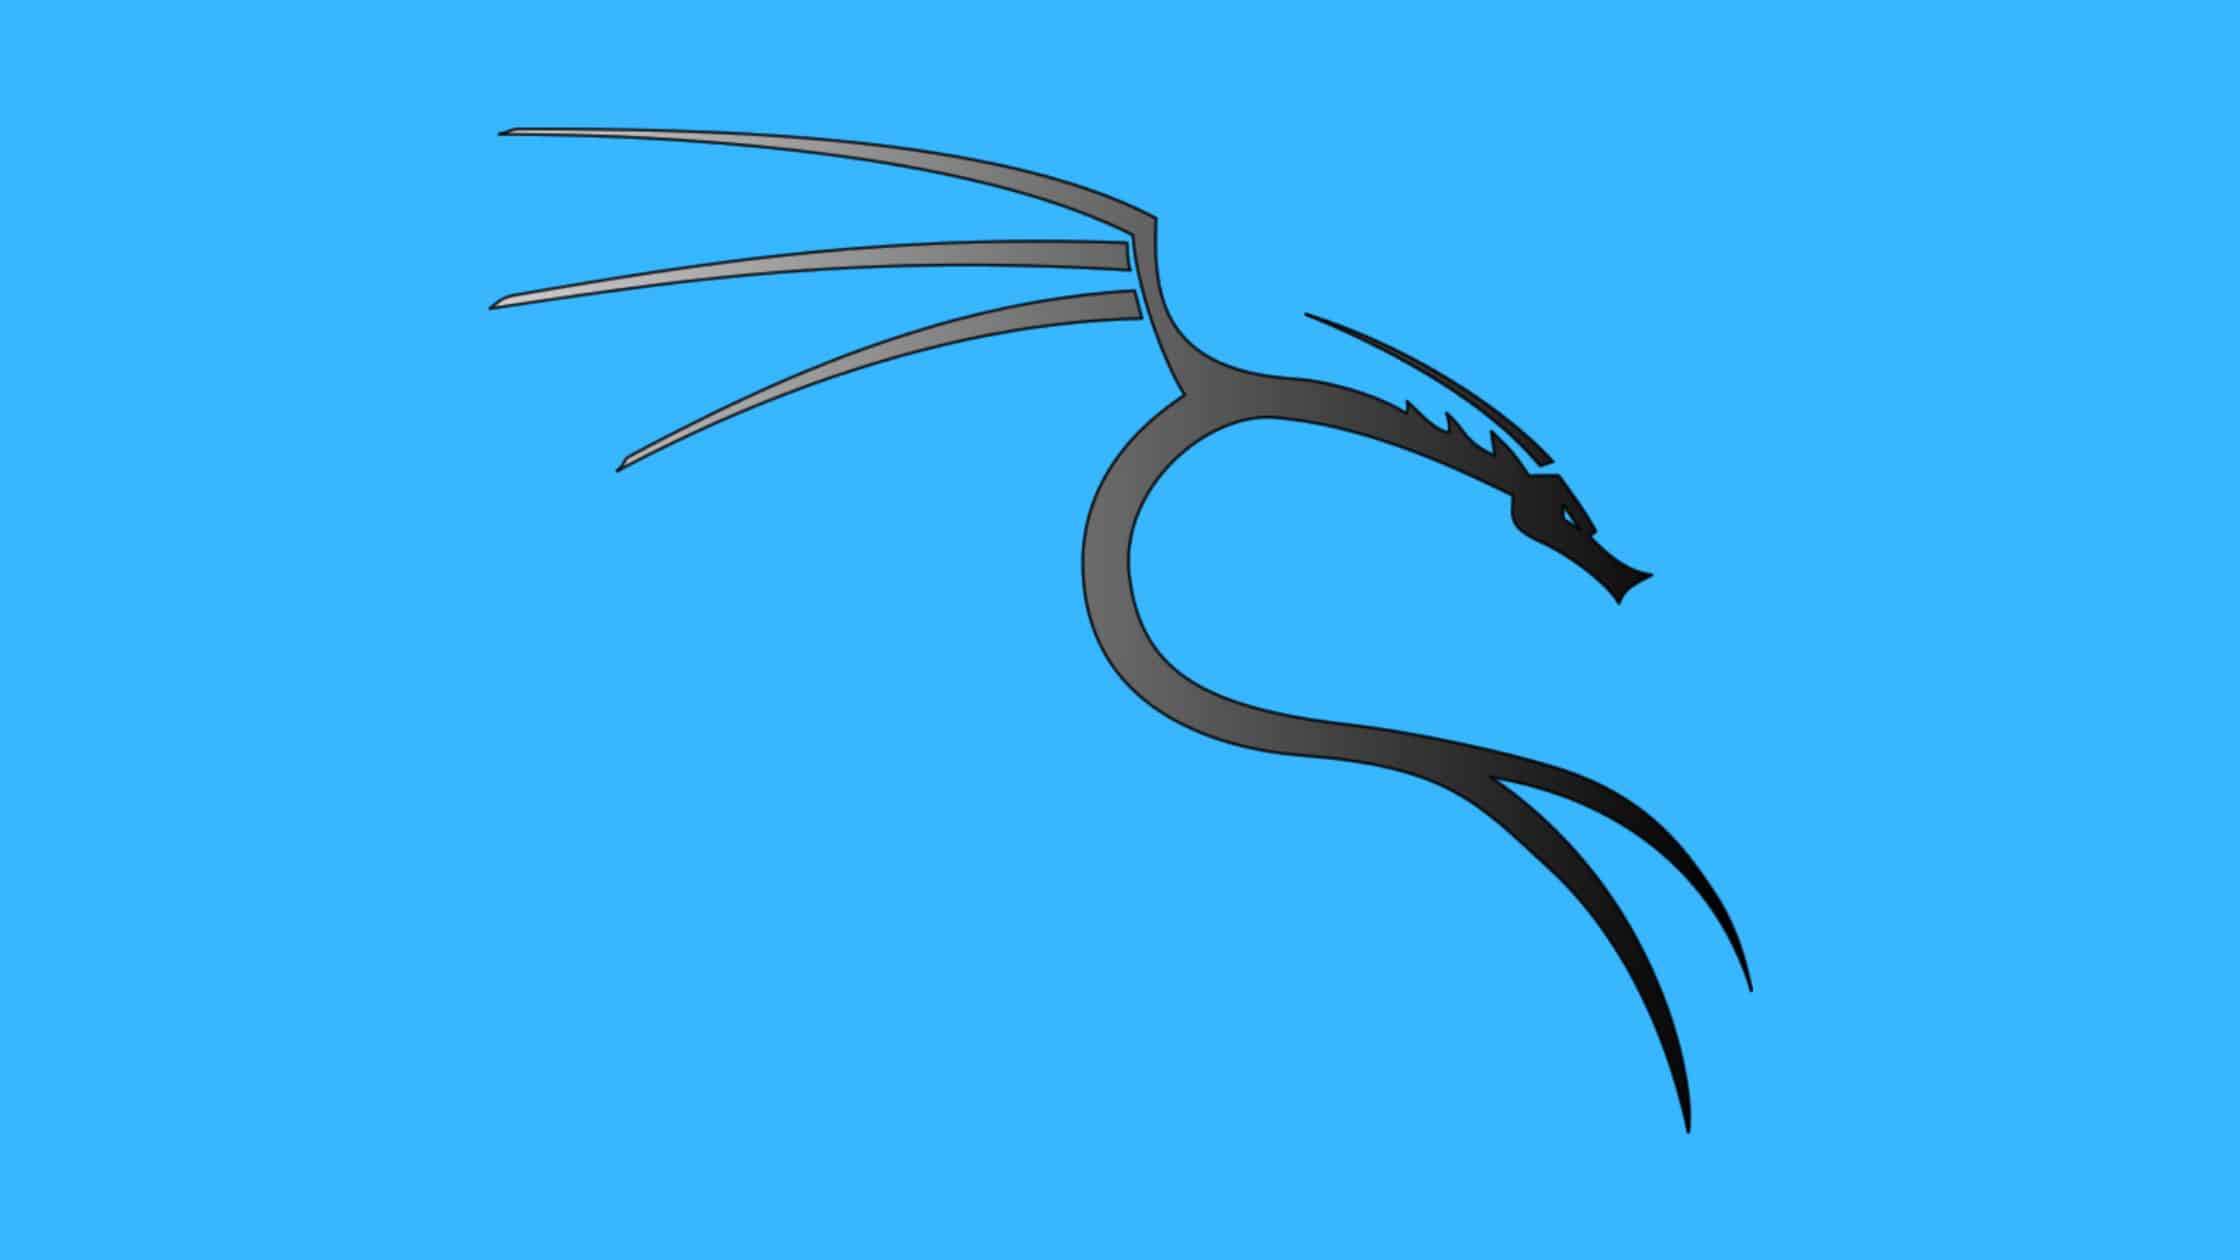 What Is New In Kali Linux 2022 3 And How To Upgrade Kali Linux To 2022 3